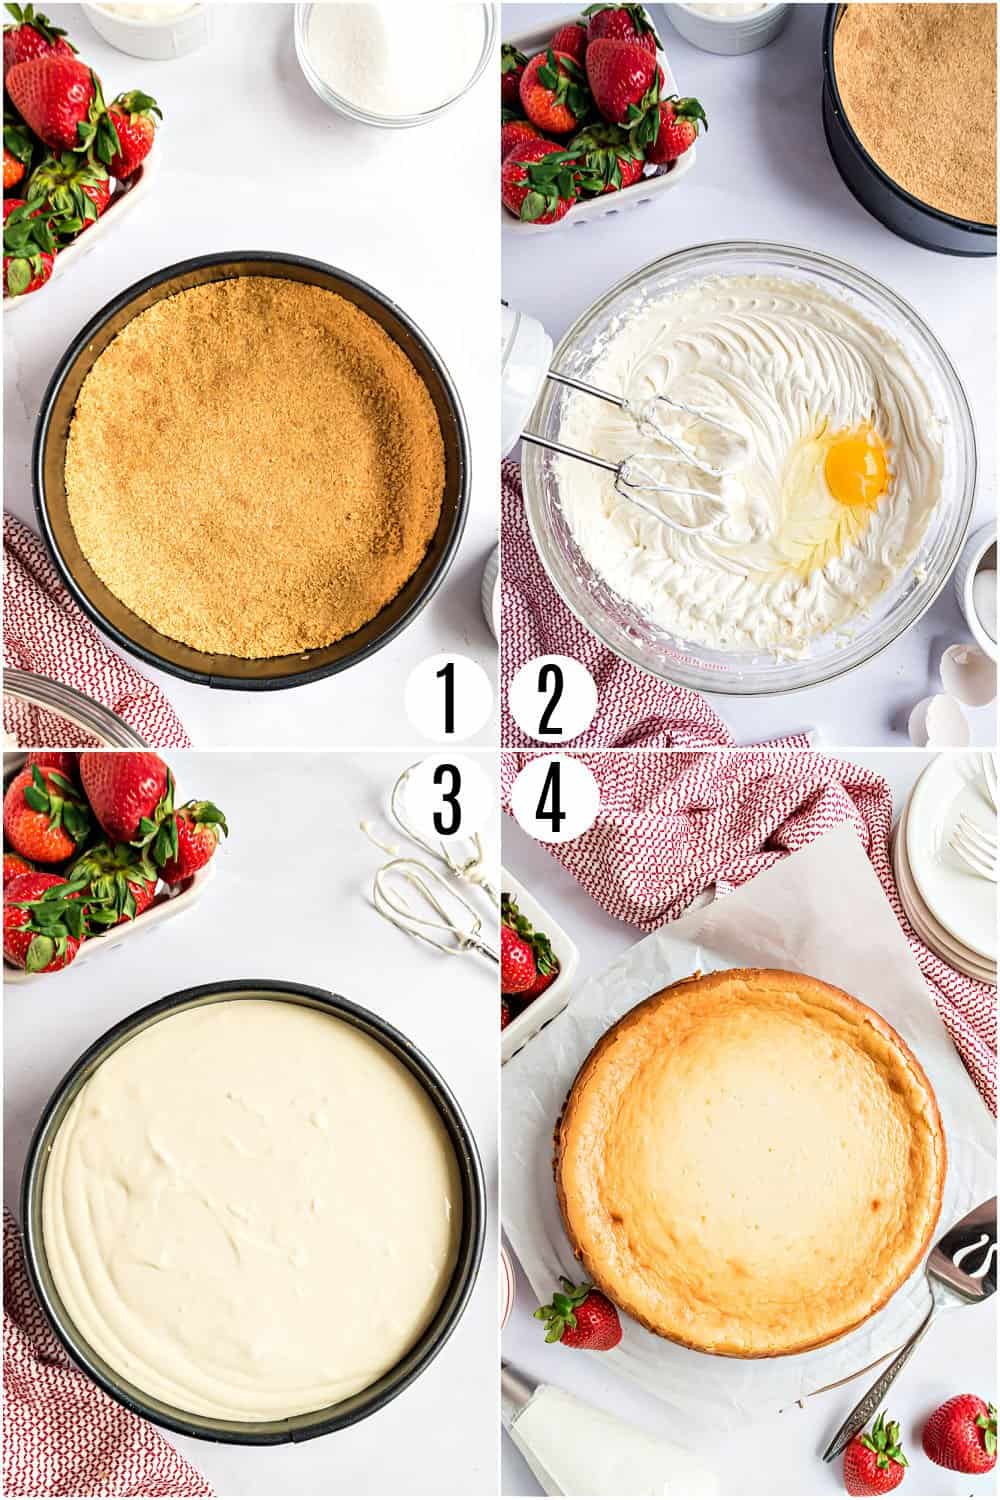 Step by step photos showing how to make cheesecake.